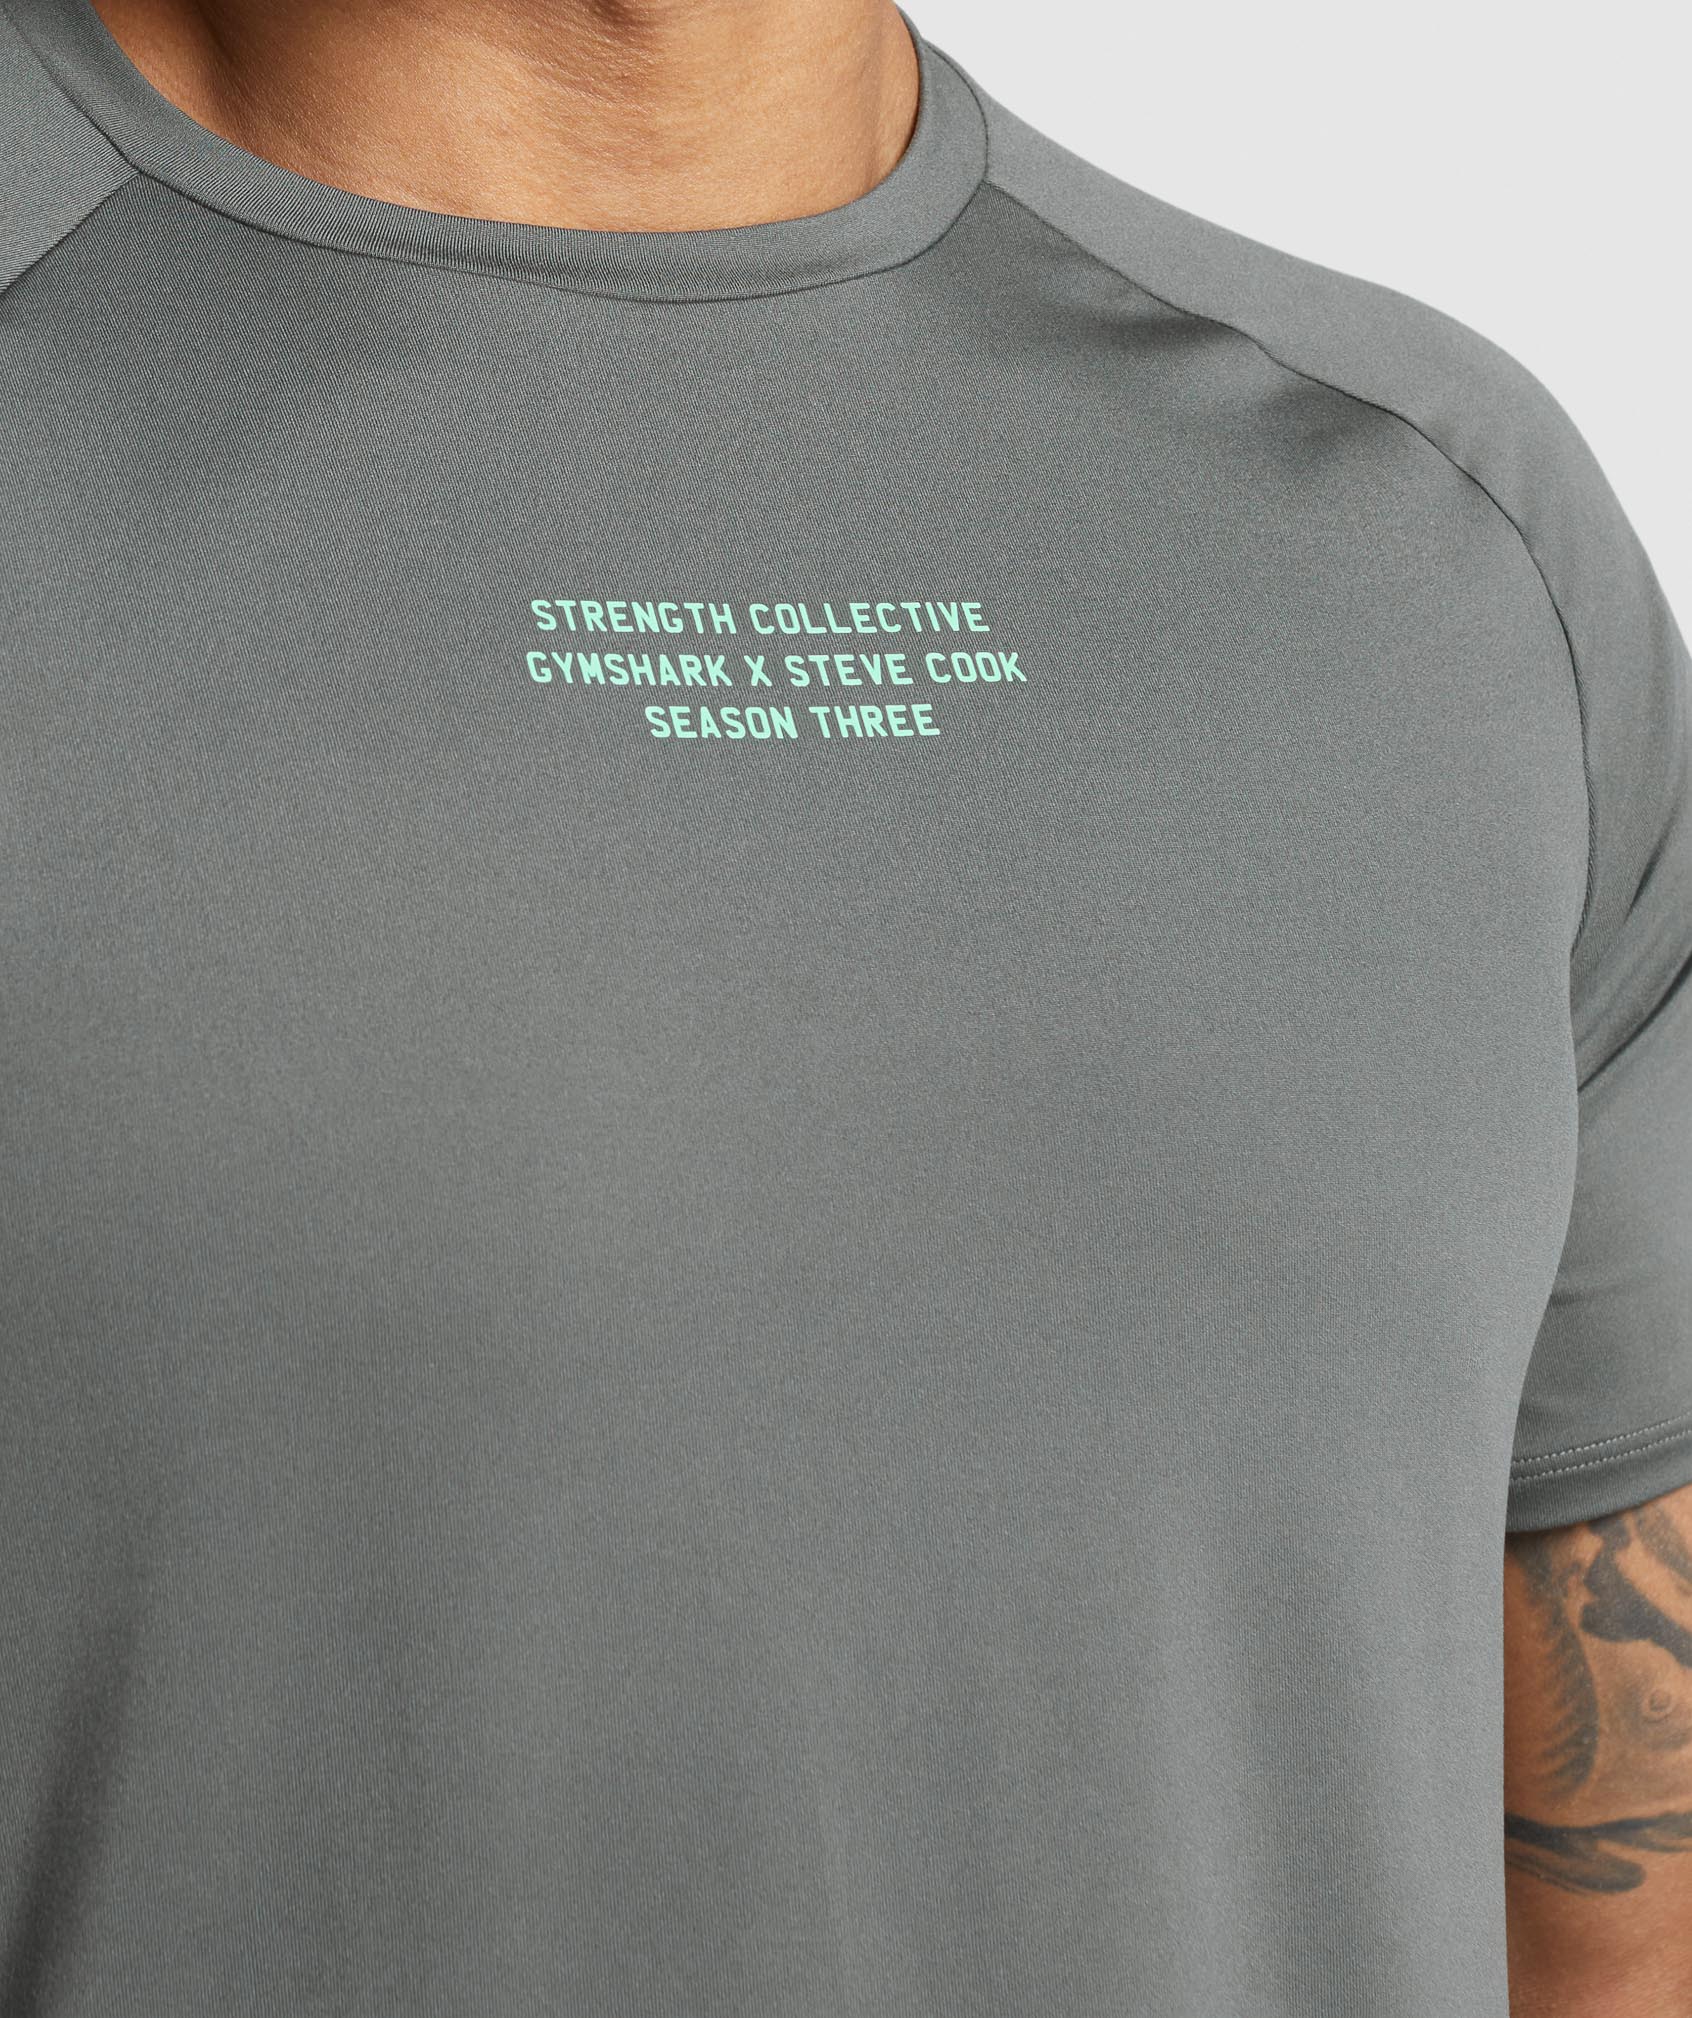 Gymshark//Steve Cook T-Shirt in Charcoal Grey - view 5